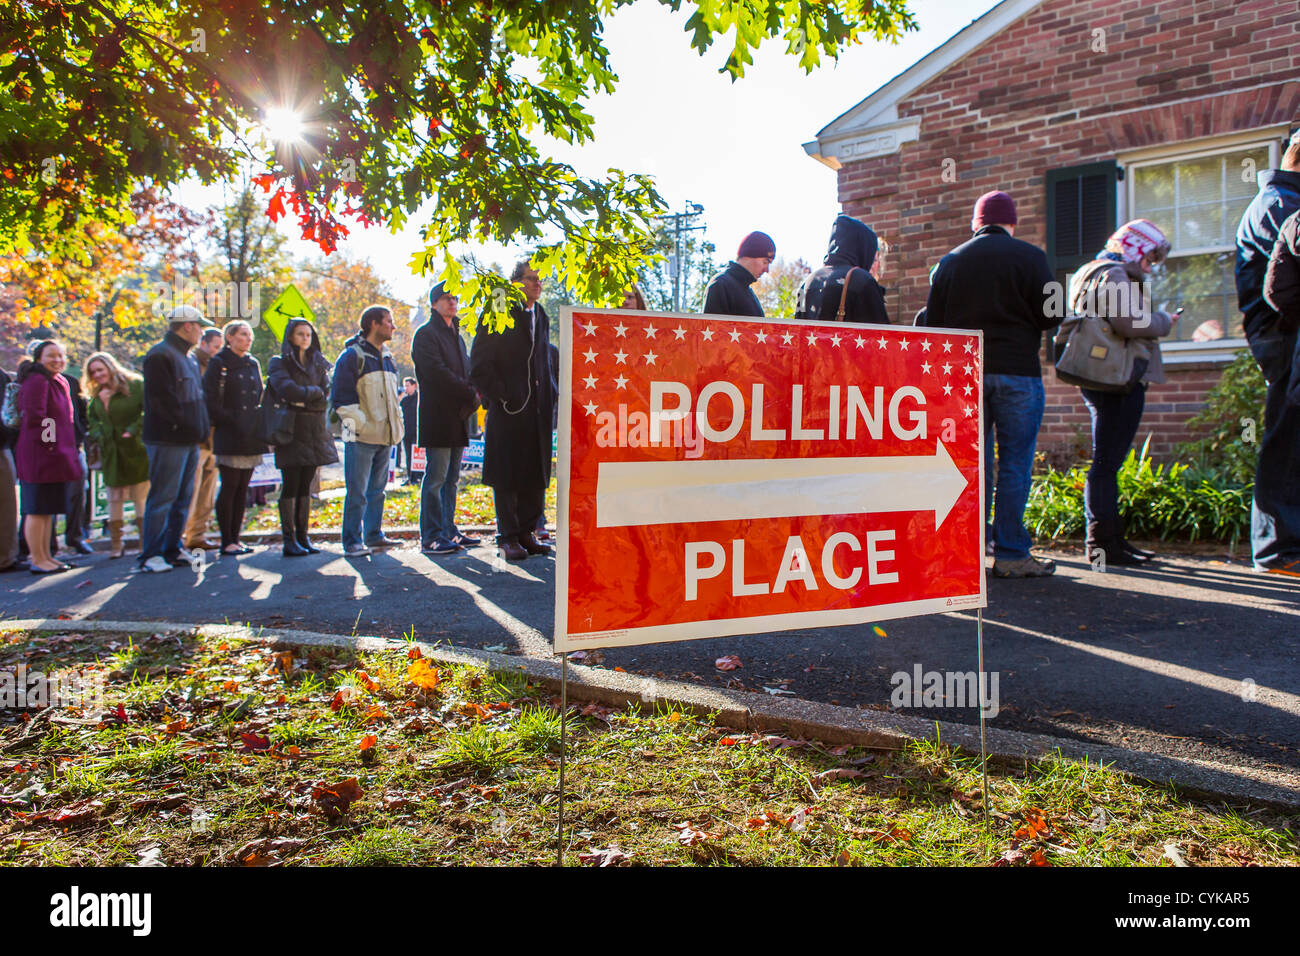 ARLINGTON, VIRGINIA, USA. 6th November, 2012. Voters line up to vote in 2012 Presidential election at Lyon Village Community House, Precinct 16. Stock Photo